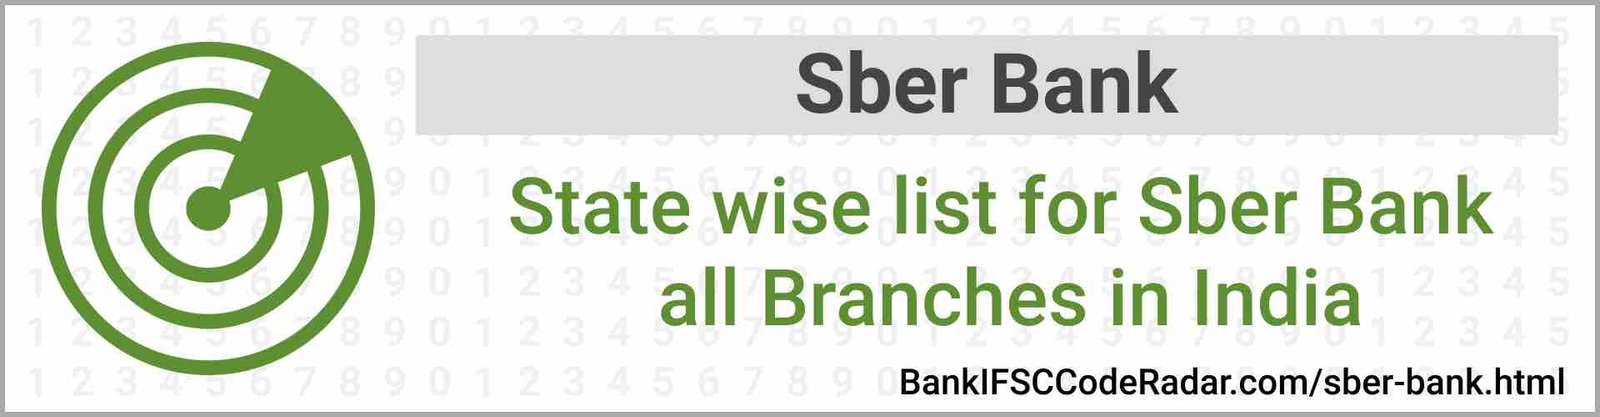 Sber Bank All Branches India